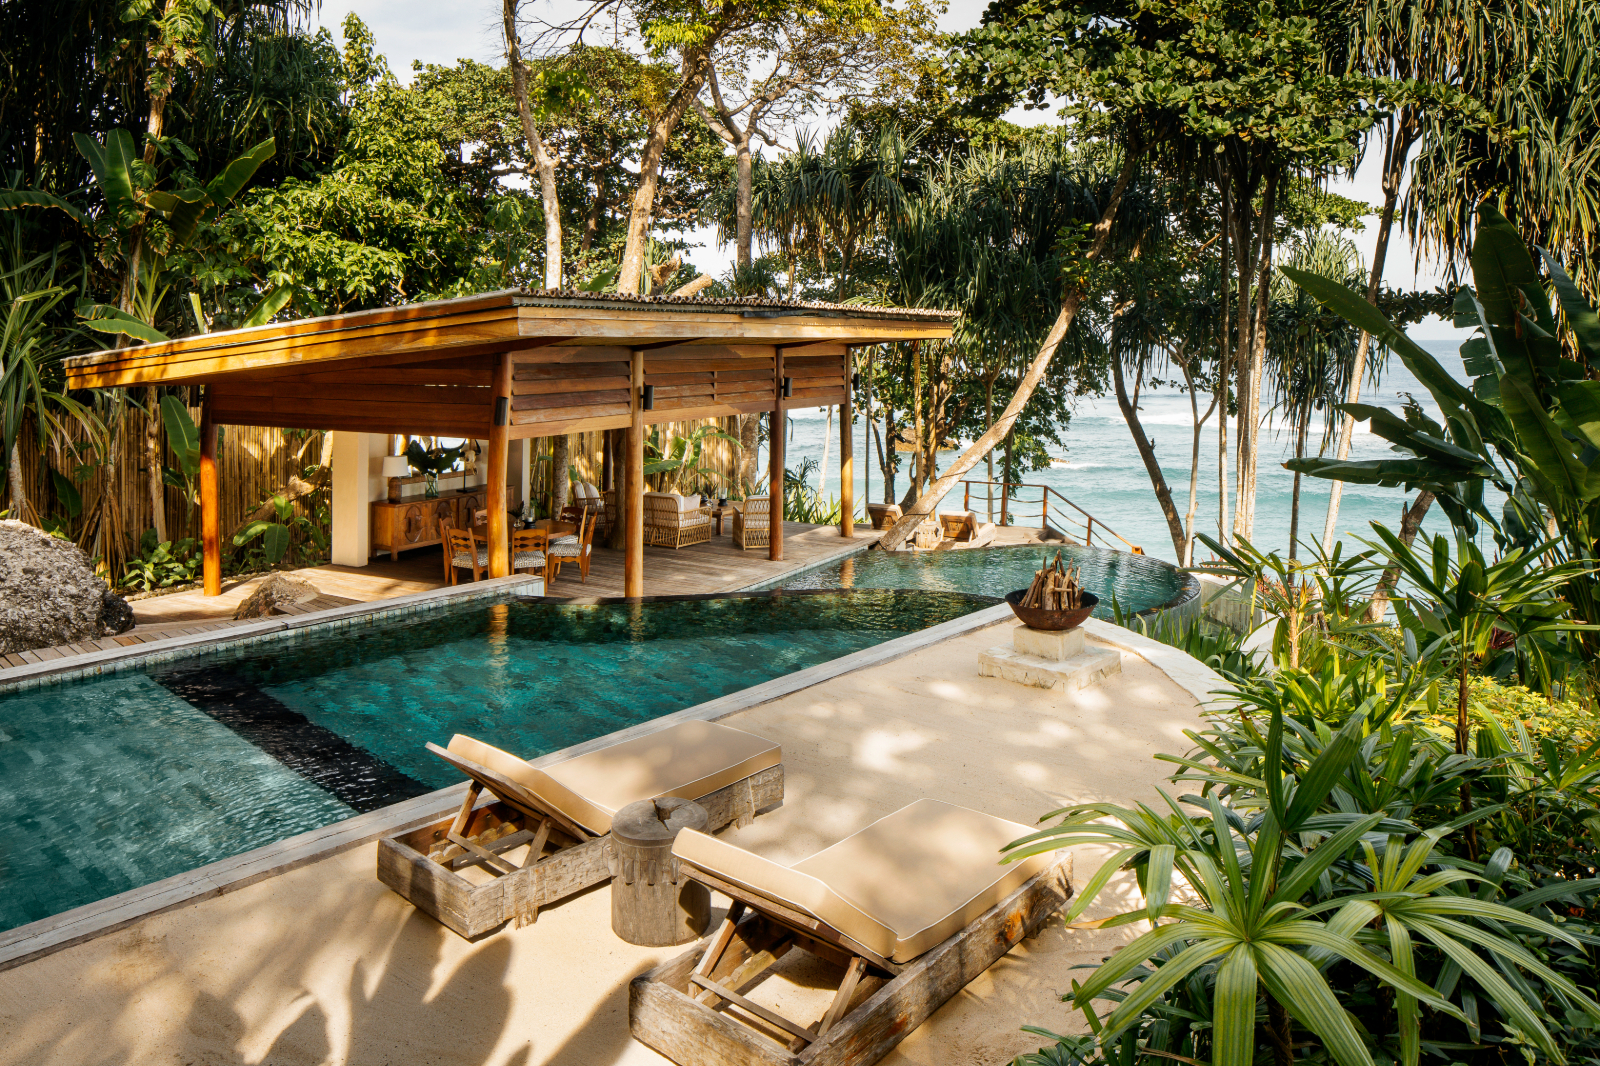 Private pool and loungers with sea view and jungle surroundings at Nihi Sumba Indonesia